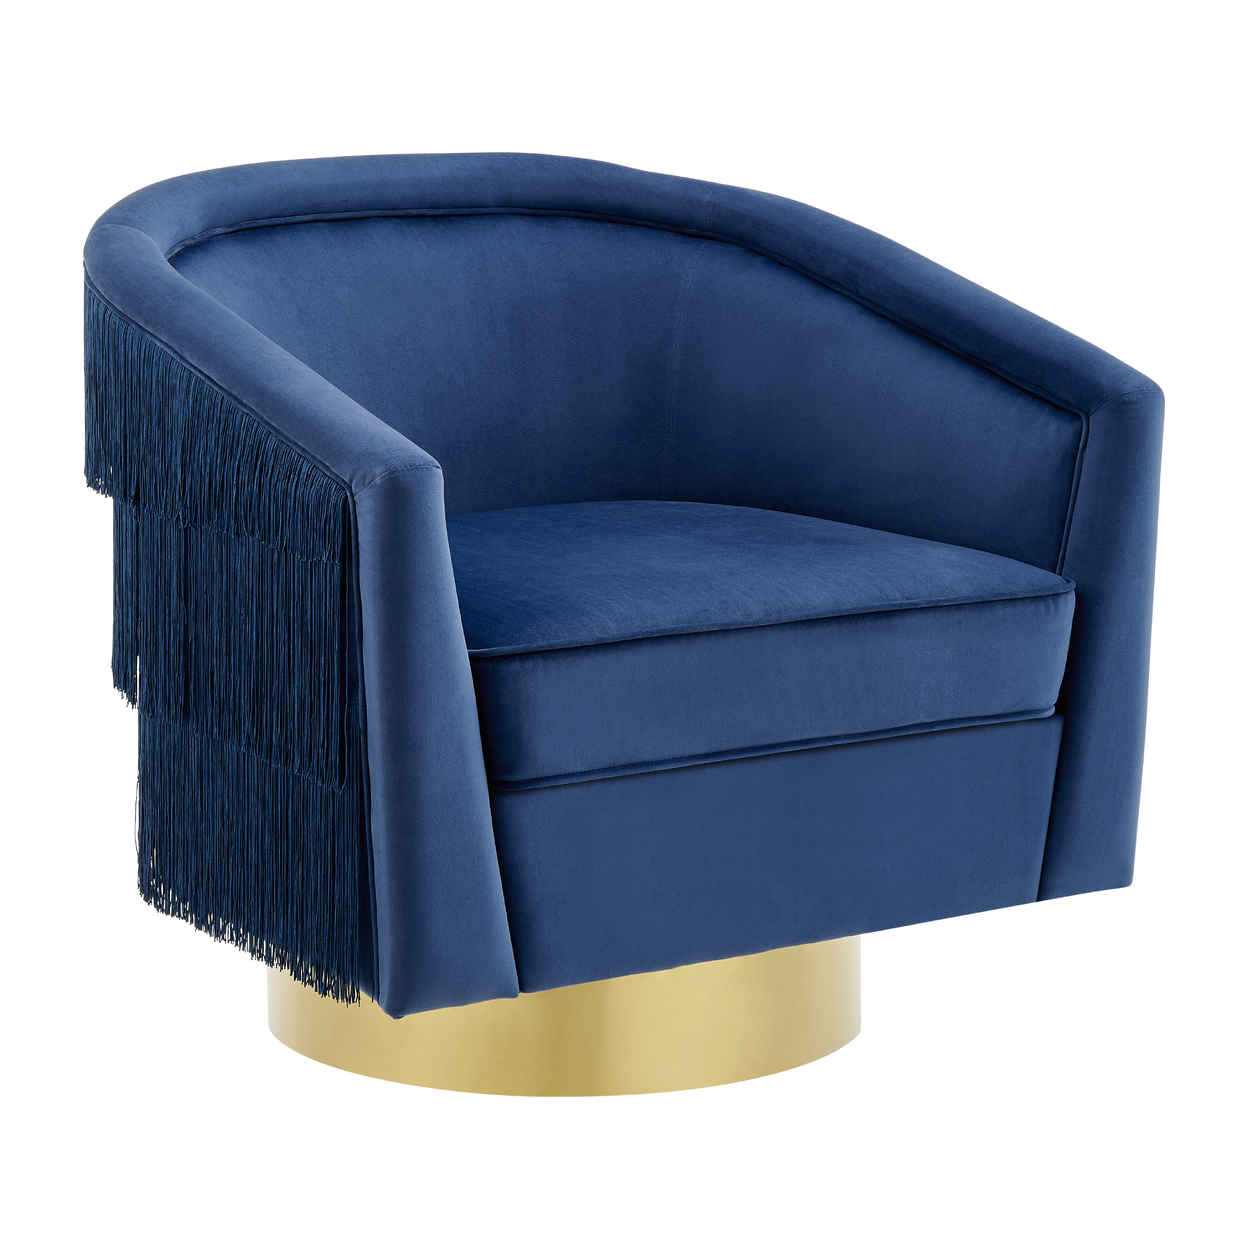 Iconic Home Elyana Swivel Accent Chair Cozy Plush Velvet Upholstered Loose Seat Design Tiered Tassel Fringes Gold Tone Metal Base - Blue